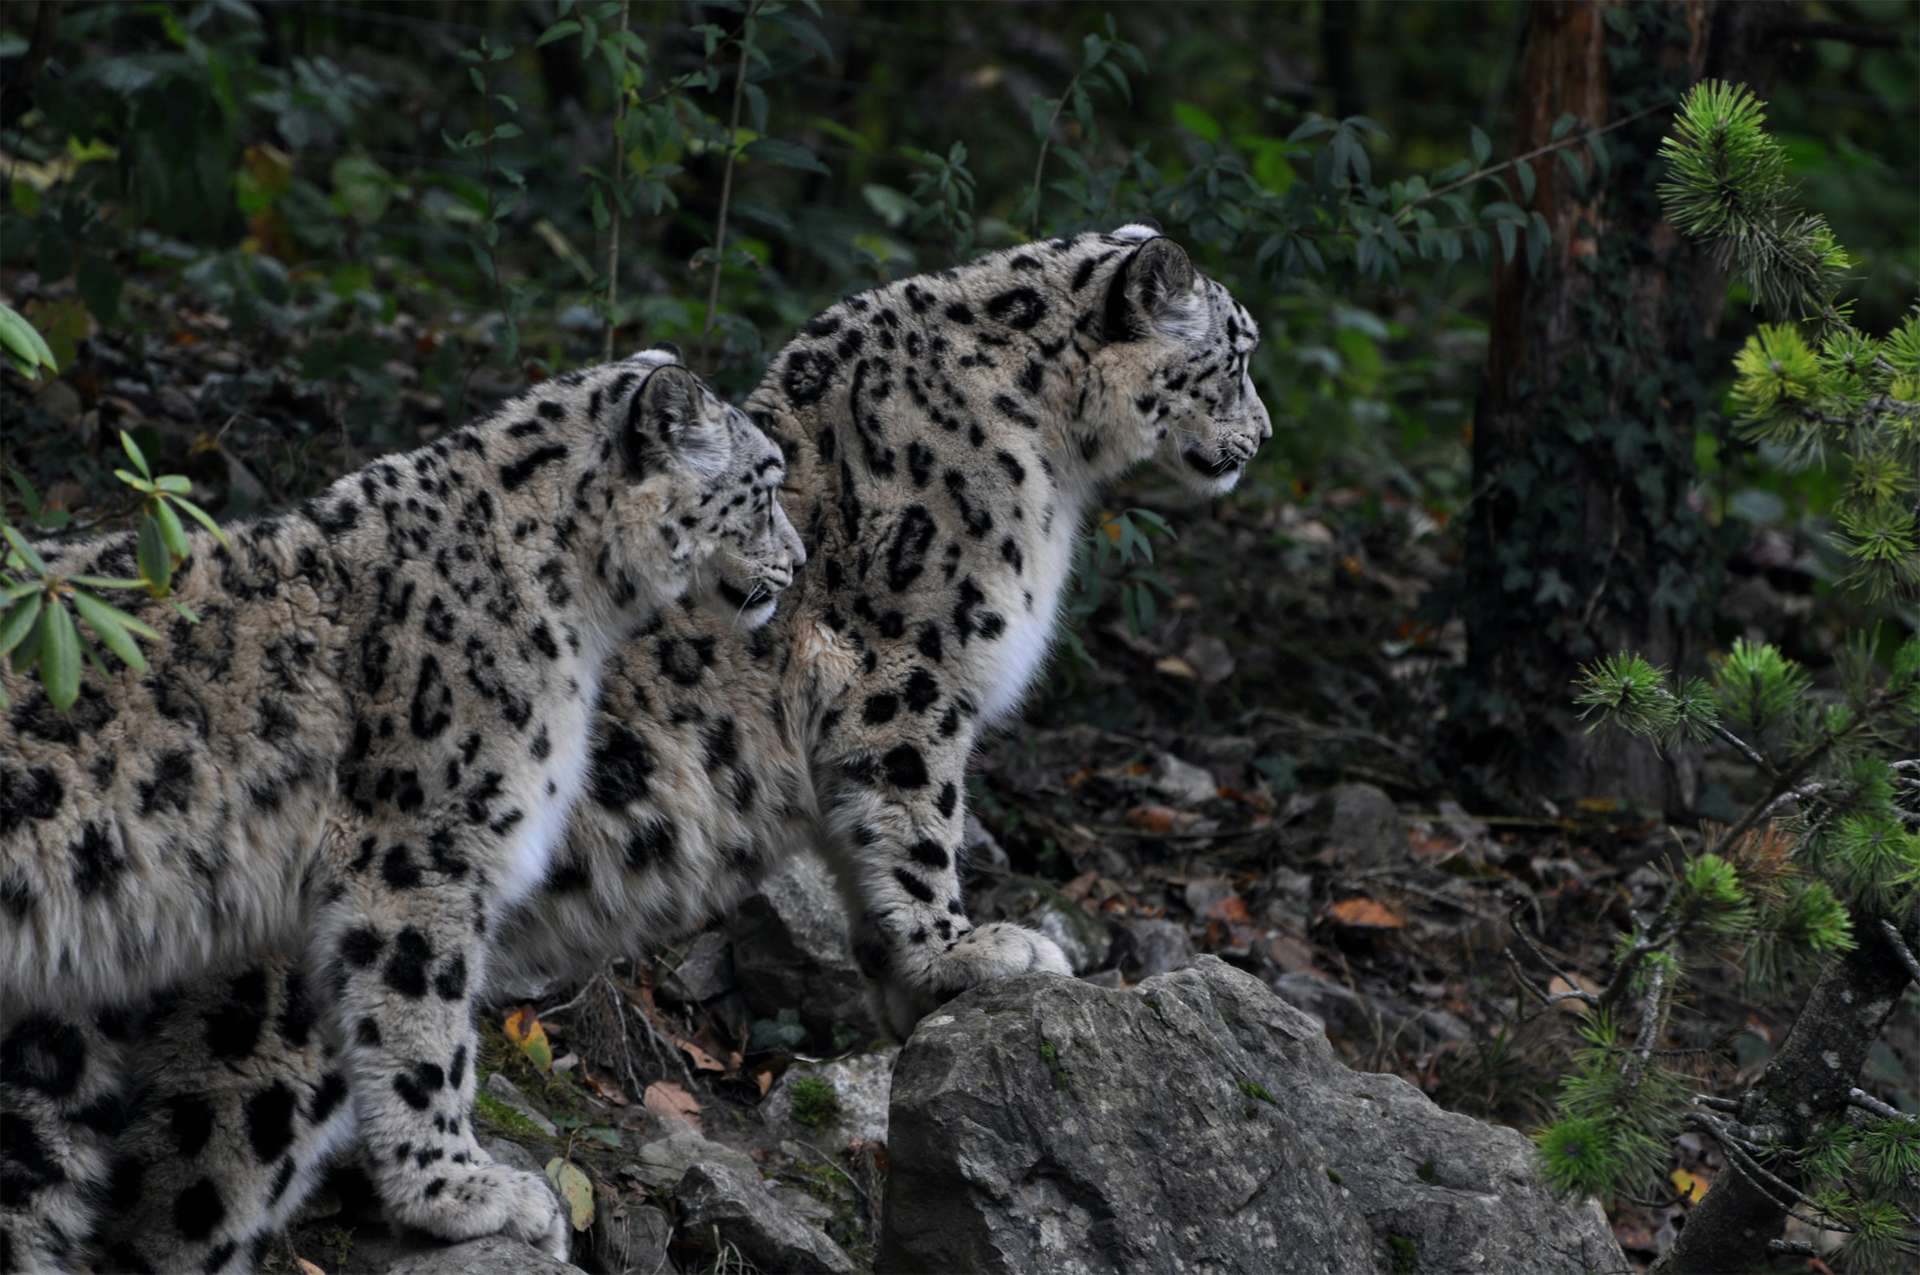 Two snow leopards endangered big cats of the Himalayas majestic and elegant